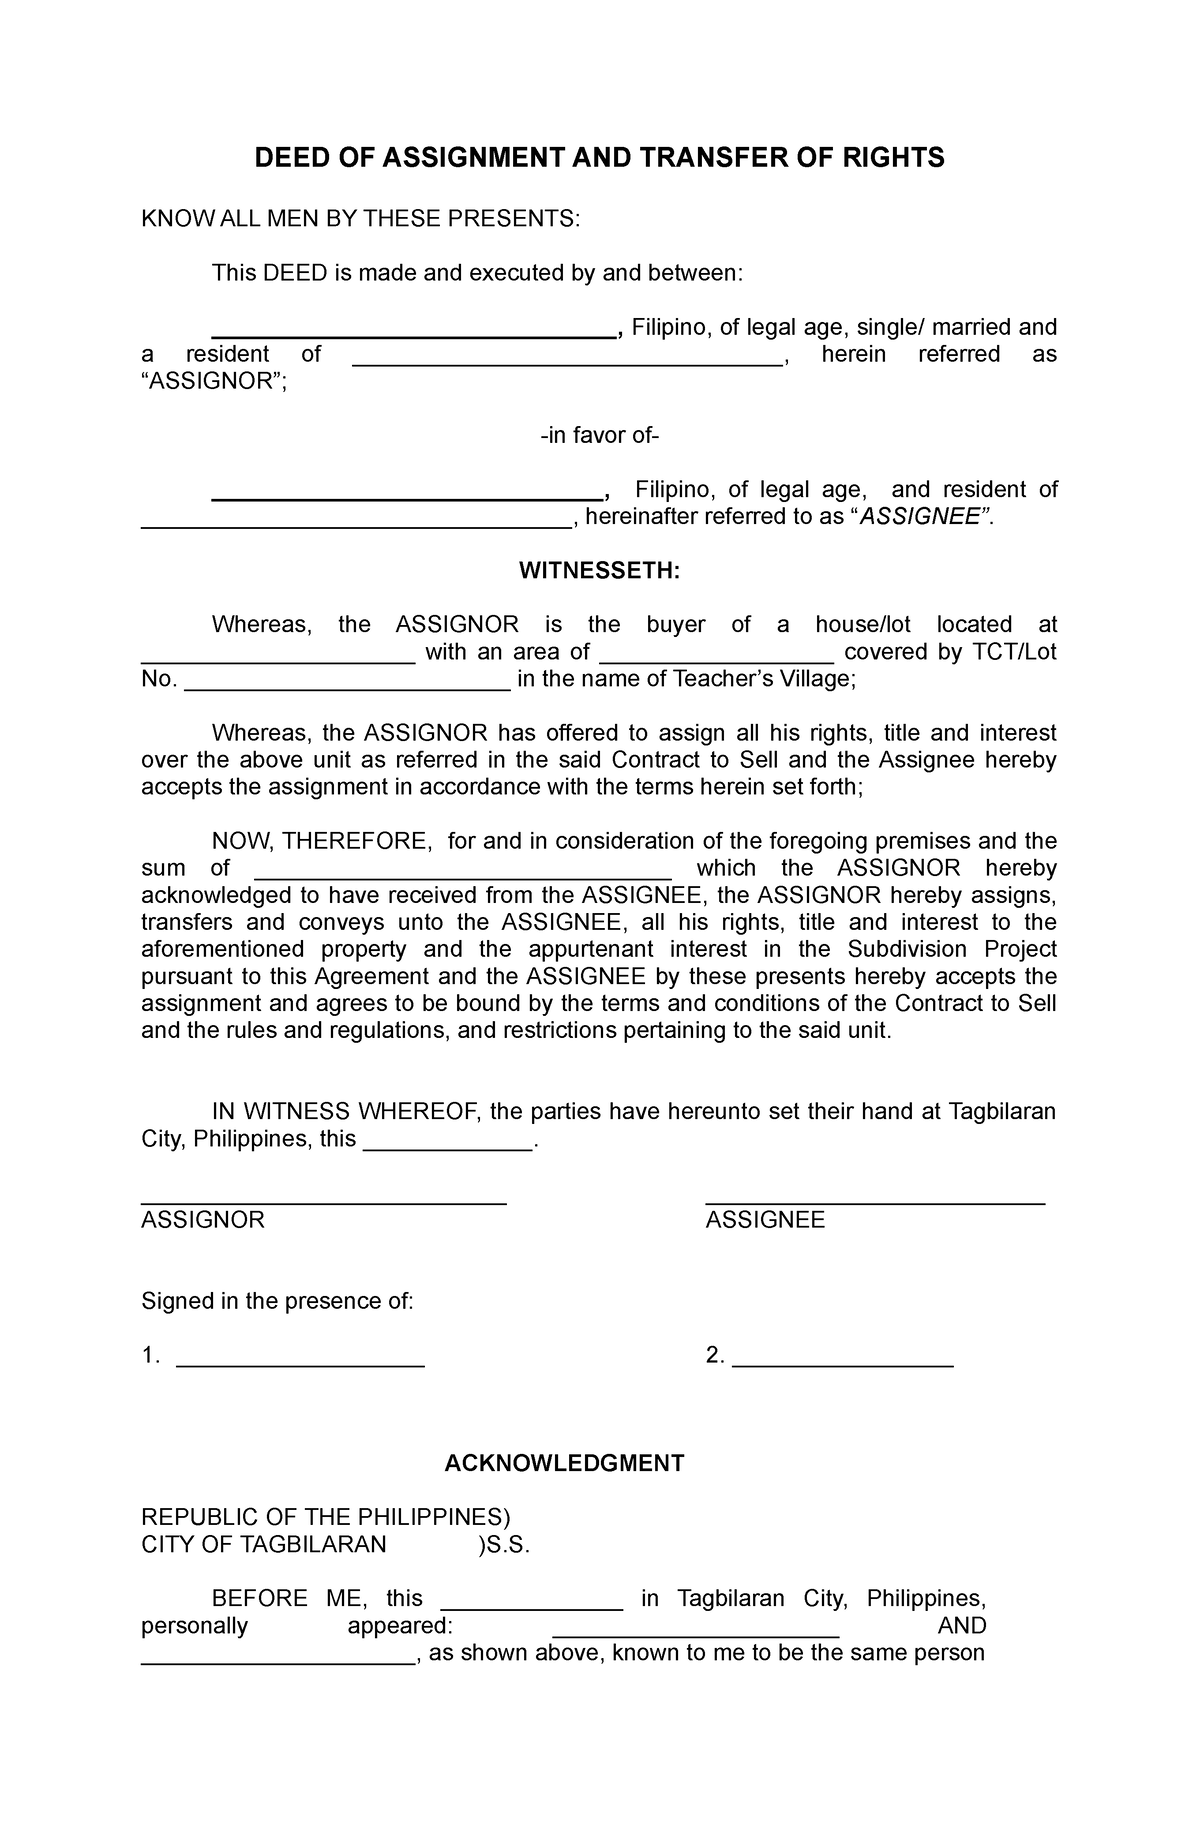 deed of assignment and transfer of rights pdf